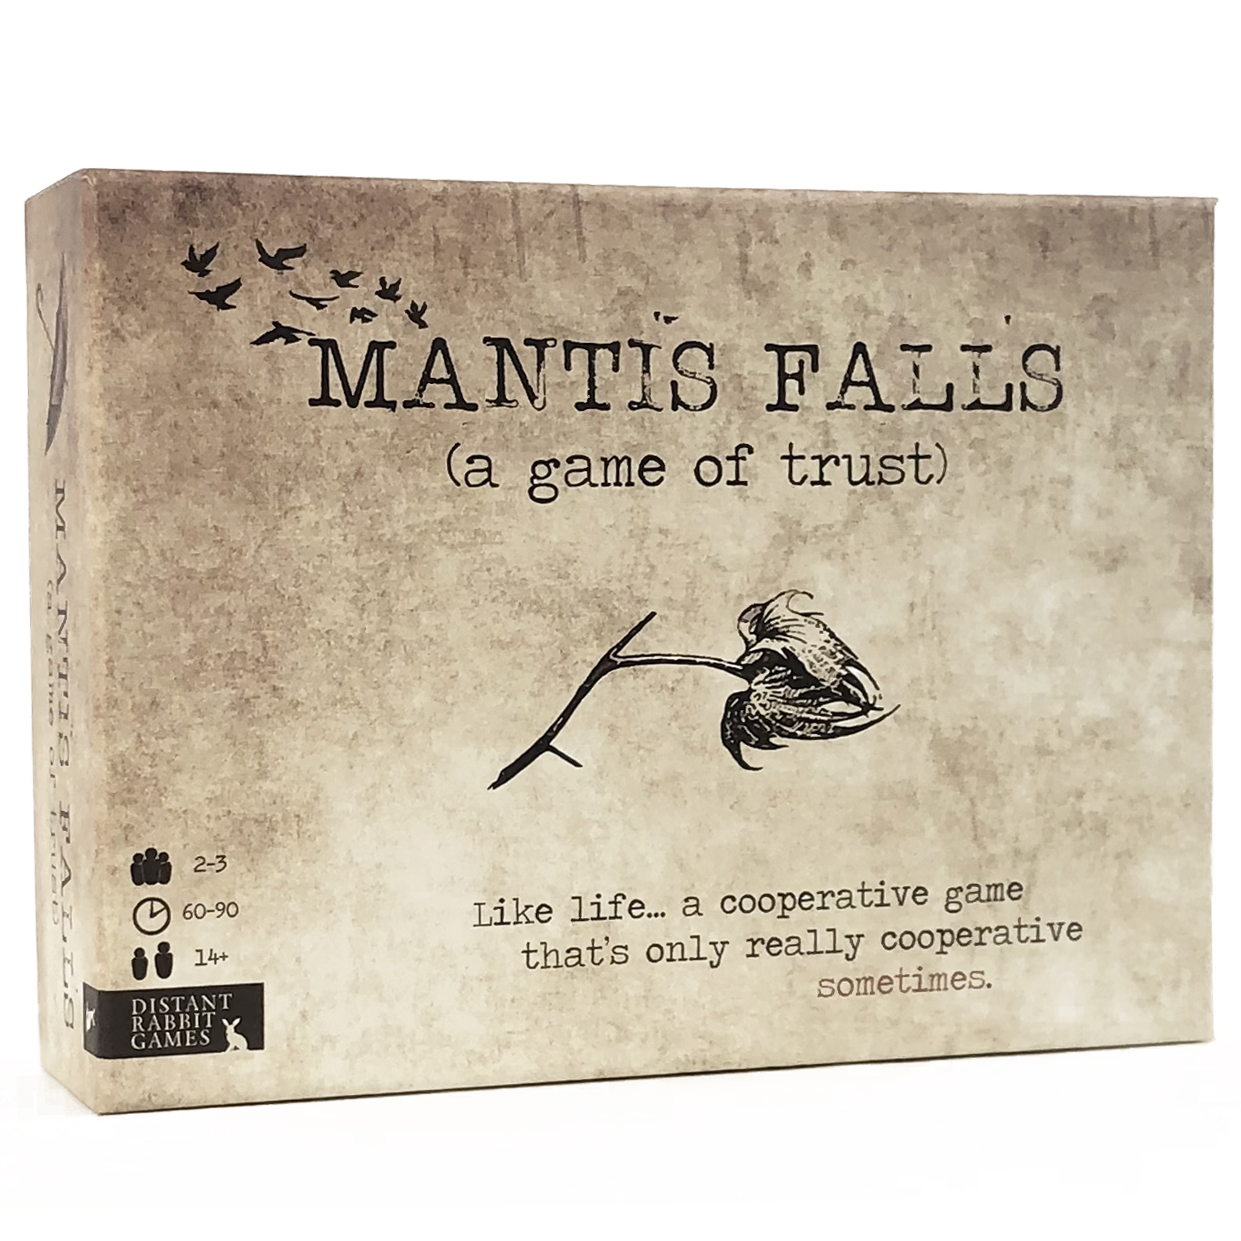 Mantis Falls (a game of trust) by Distant Rabbit Games - Mantis Falls  (retail edition) - Gamefound